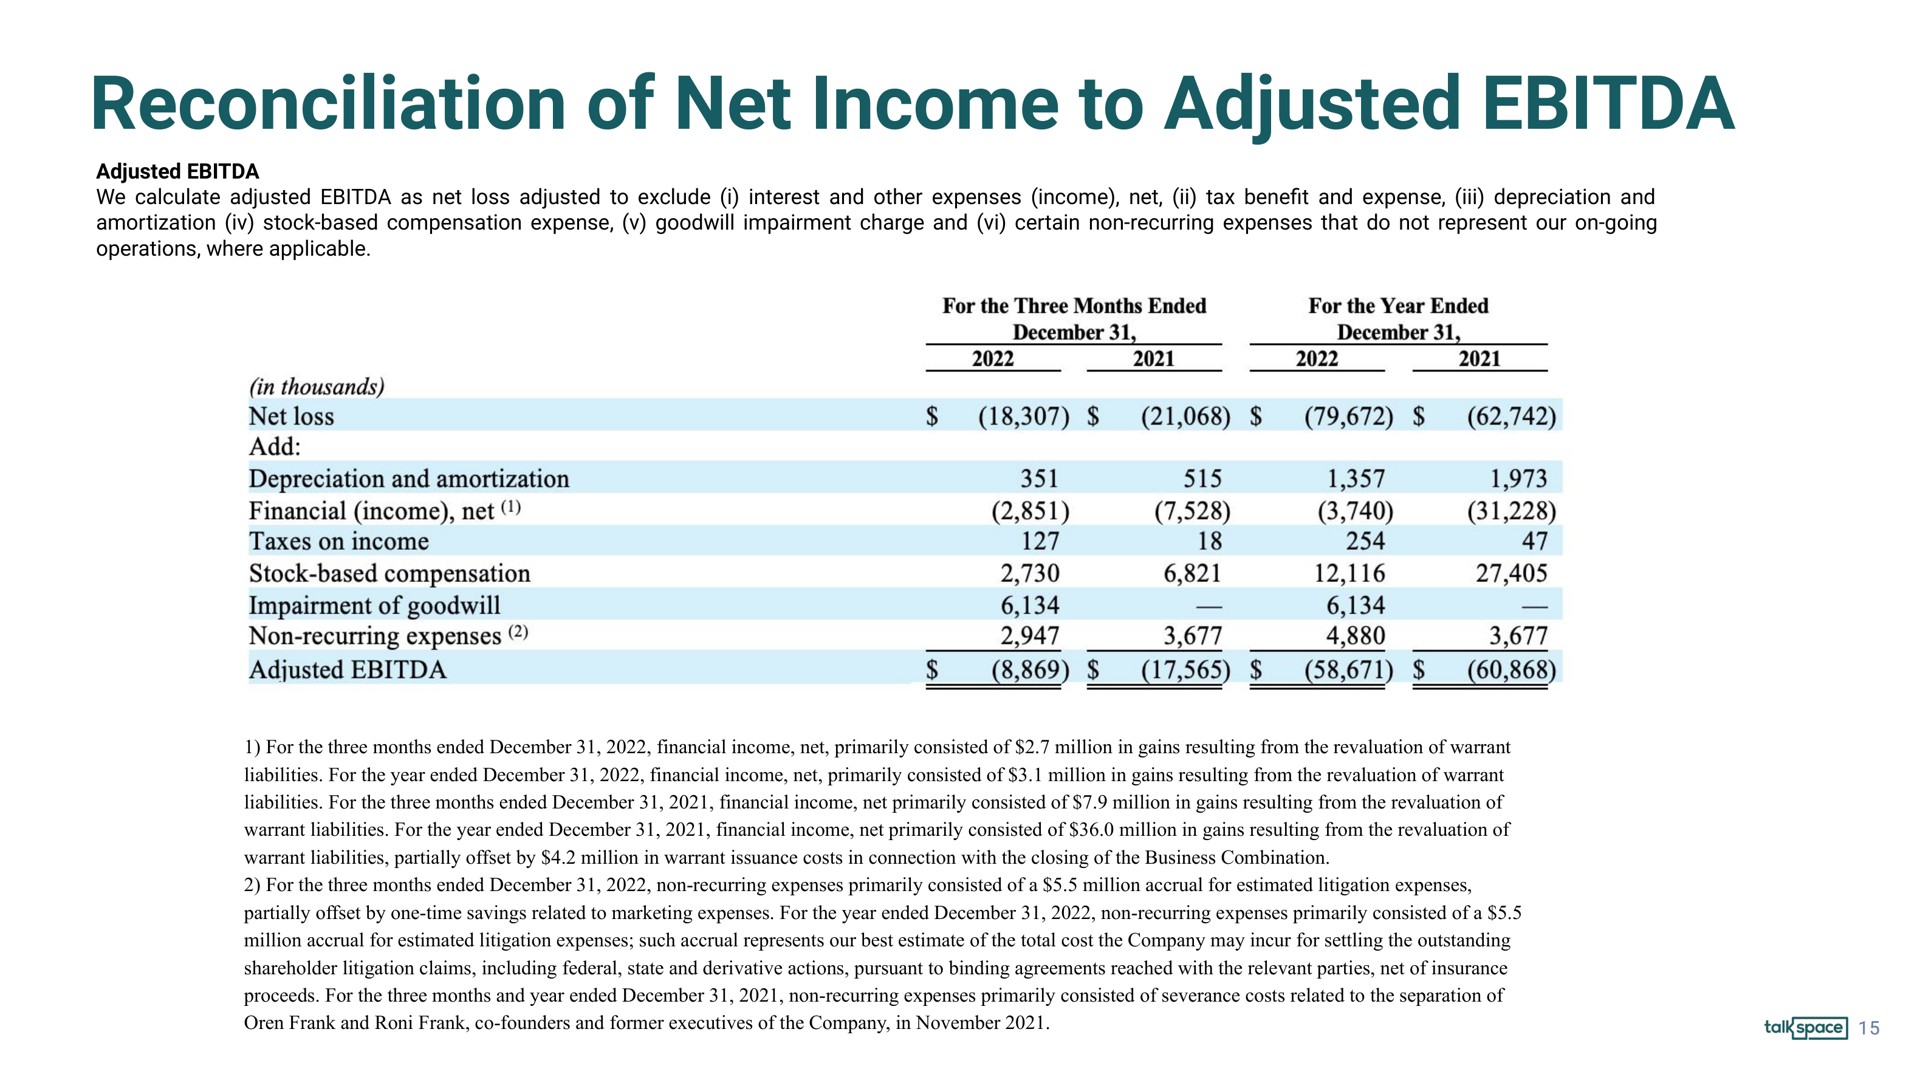 reconciliation of net income to adjusted | Talkspace